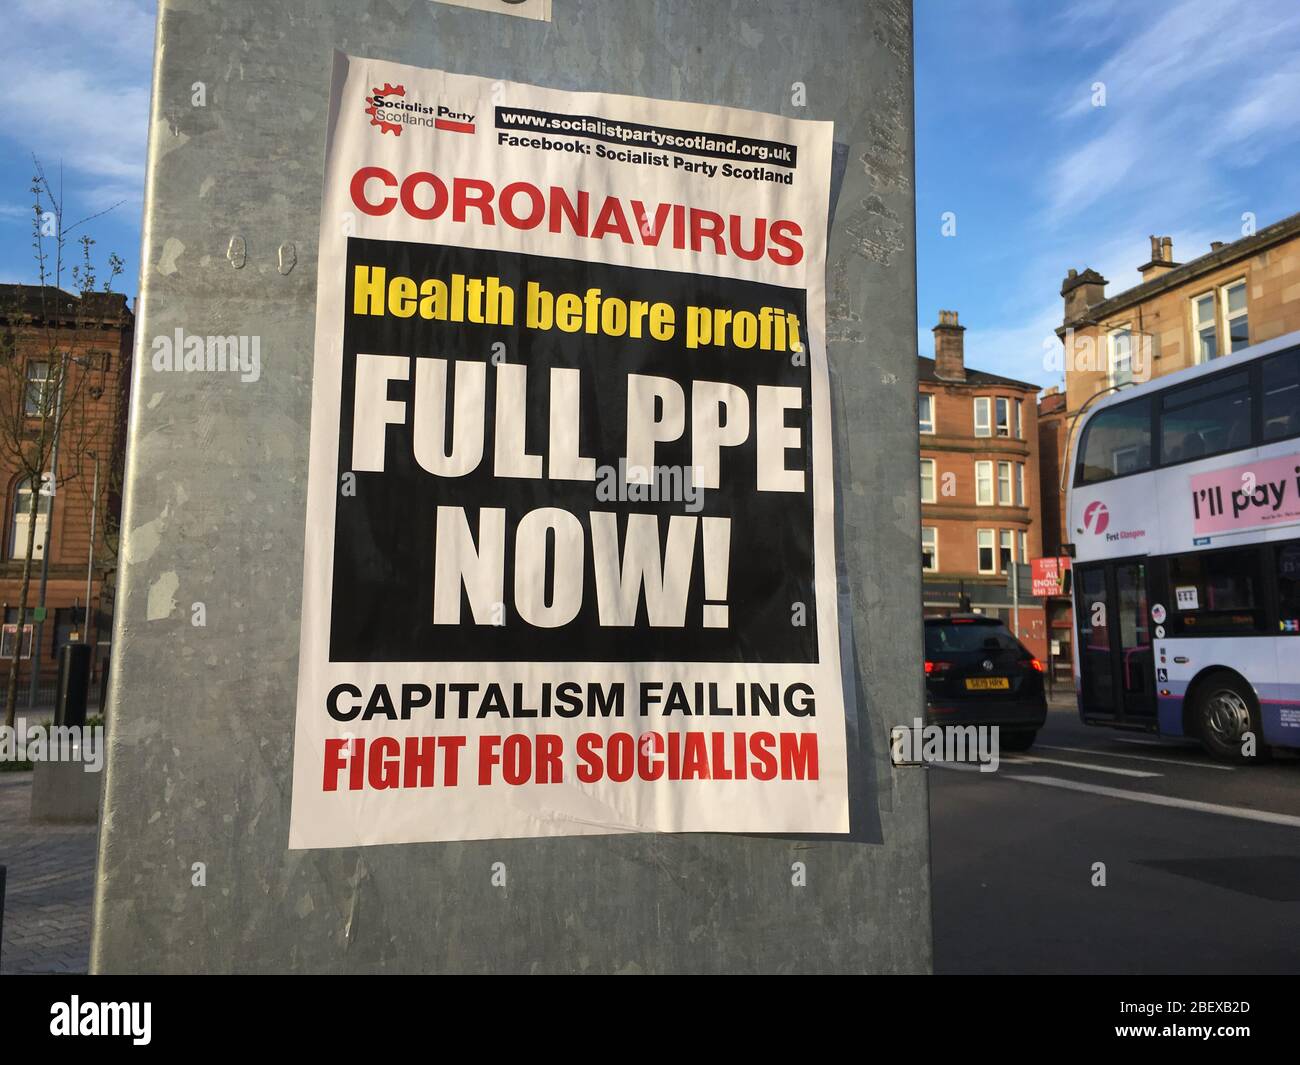 Glasgow, UK, 16 April 2020. Posters from the Socialist Party Scotland calling for full Personal Protection Equipment (PPE) and better funding for the National Health Service, during the current Coronavirus COVID-19 pandemic health crisis.  Photo credit: Jeremy Sutton-Hibbert/ Alamy Live News. Stock Photo